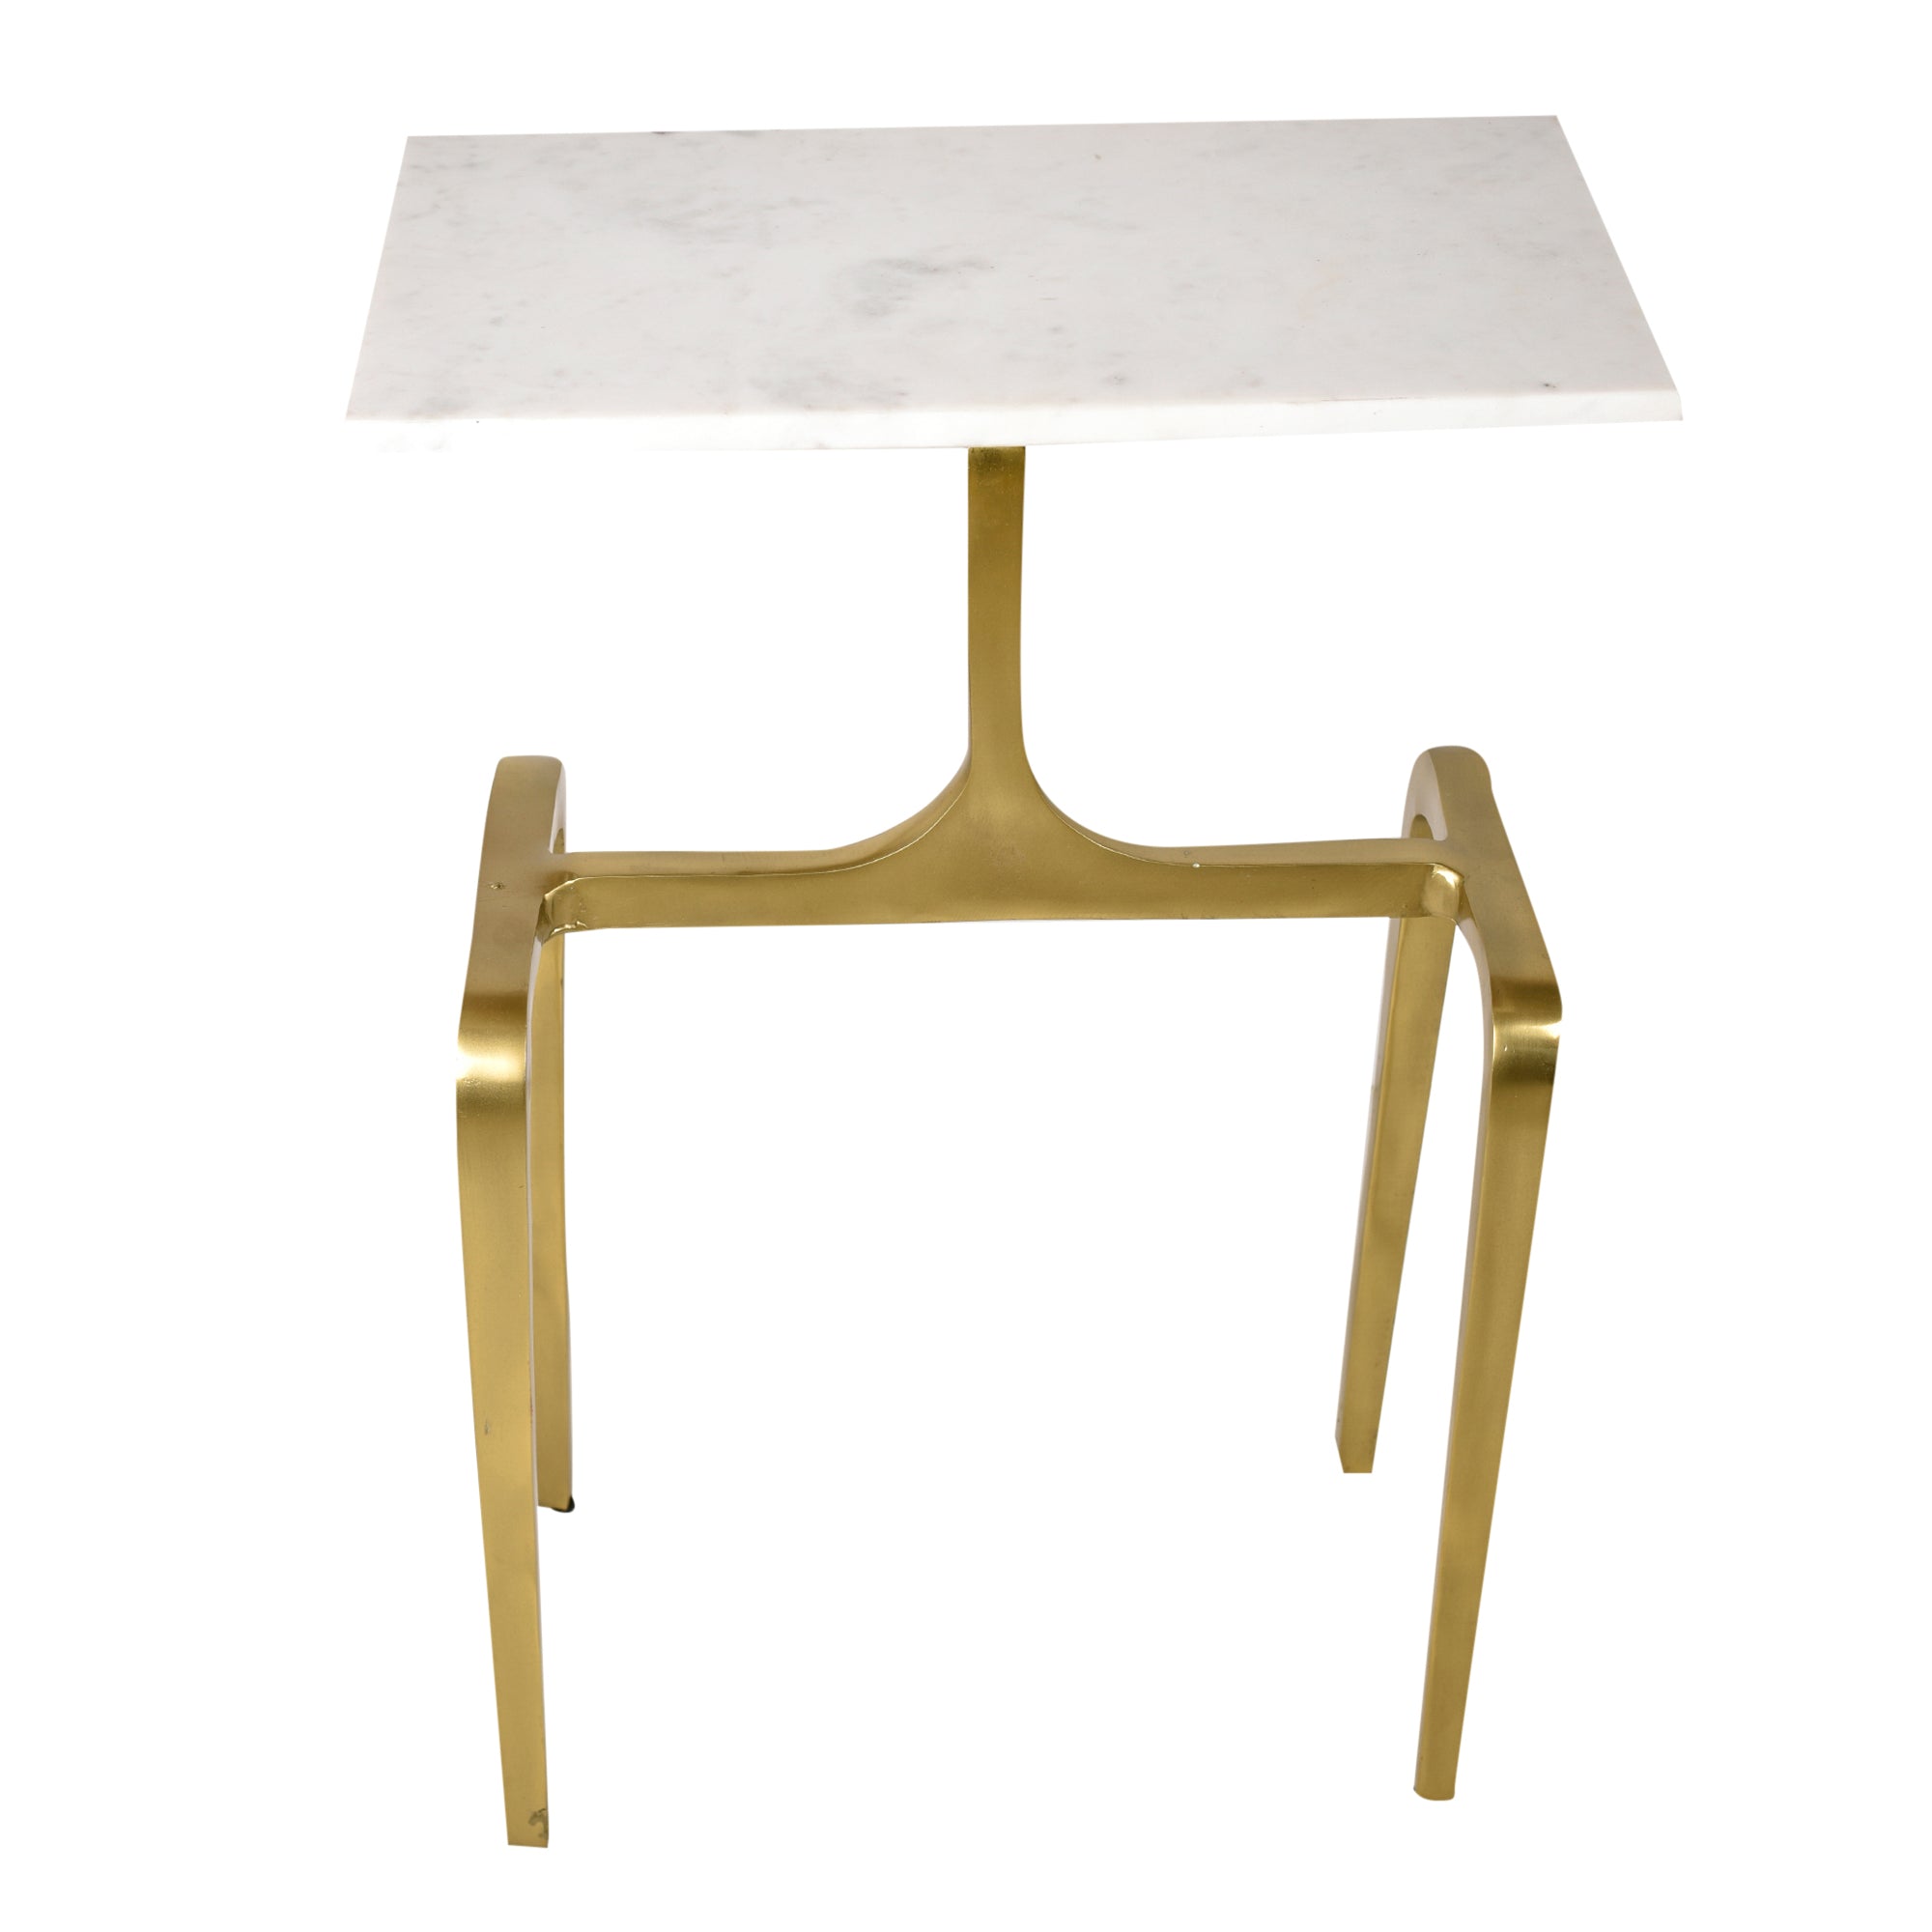 Square Foldable Accent Table 17 inch long